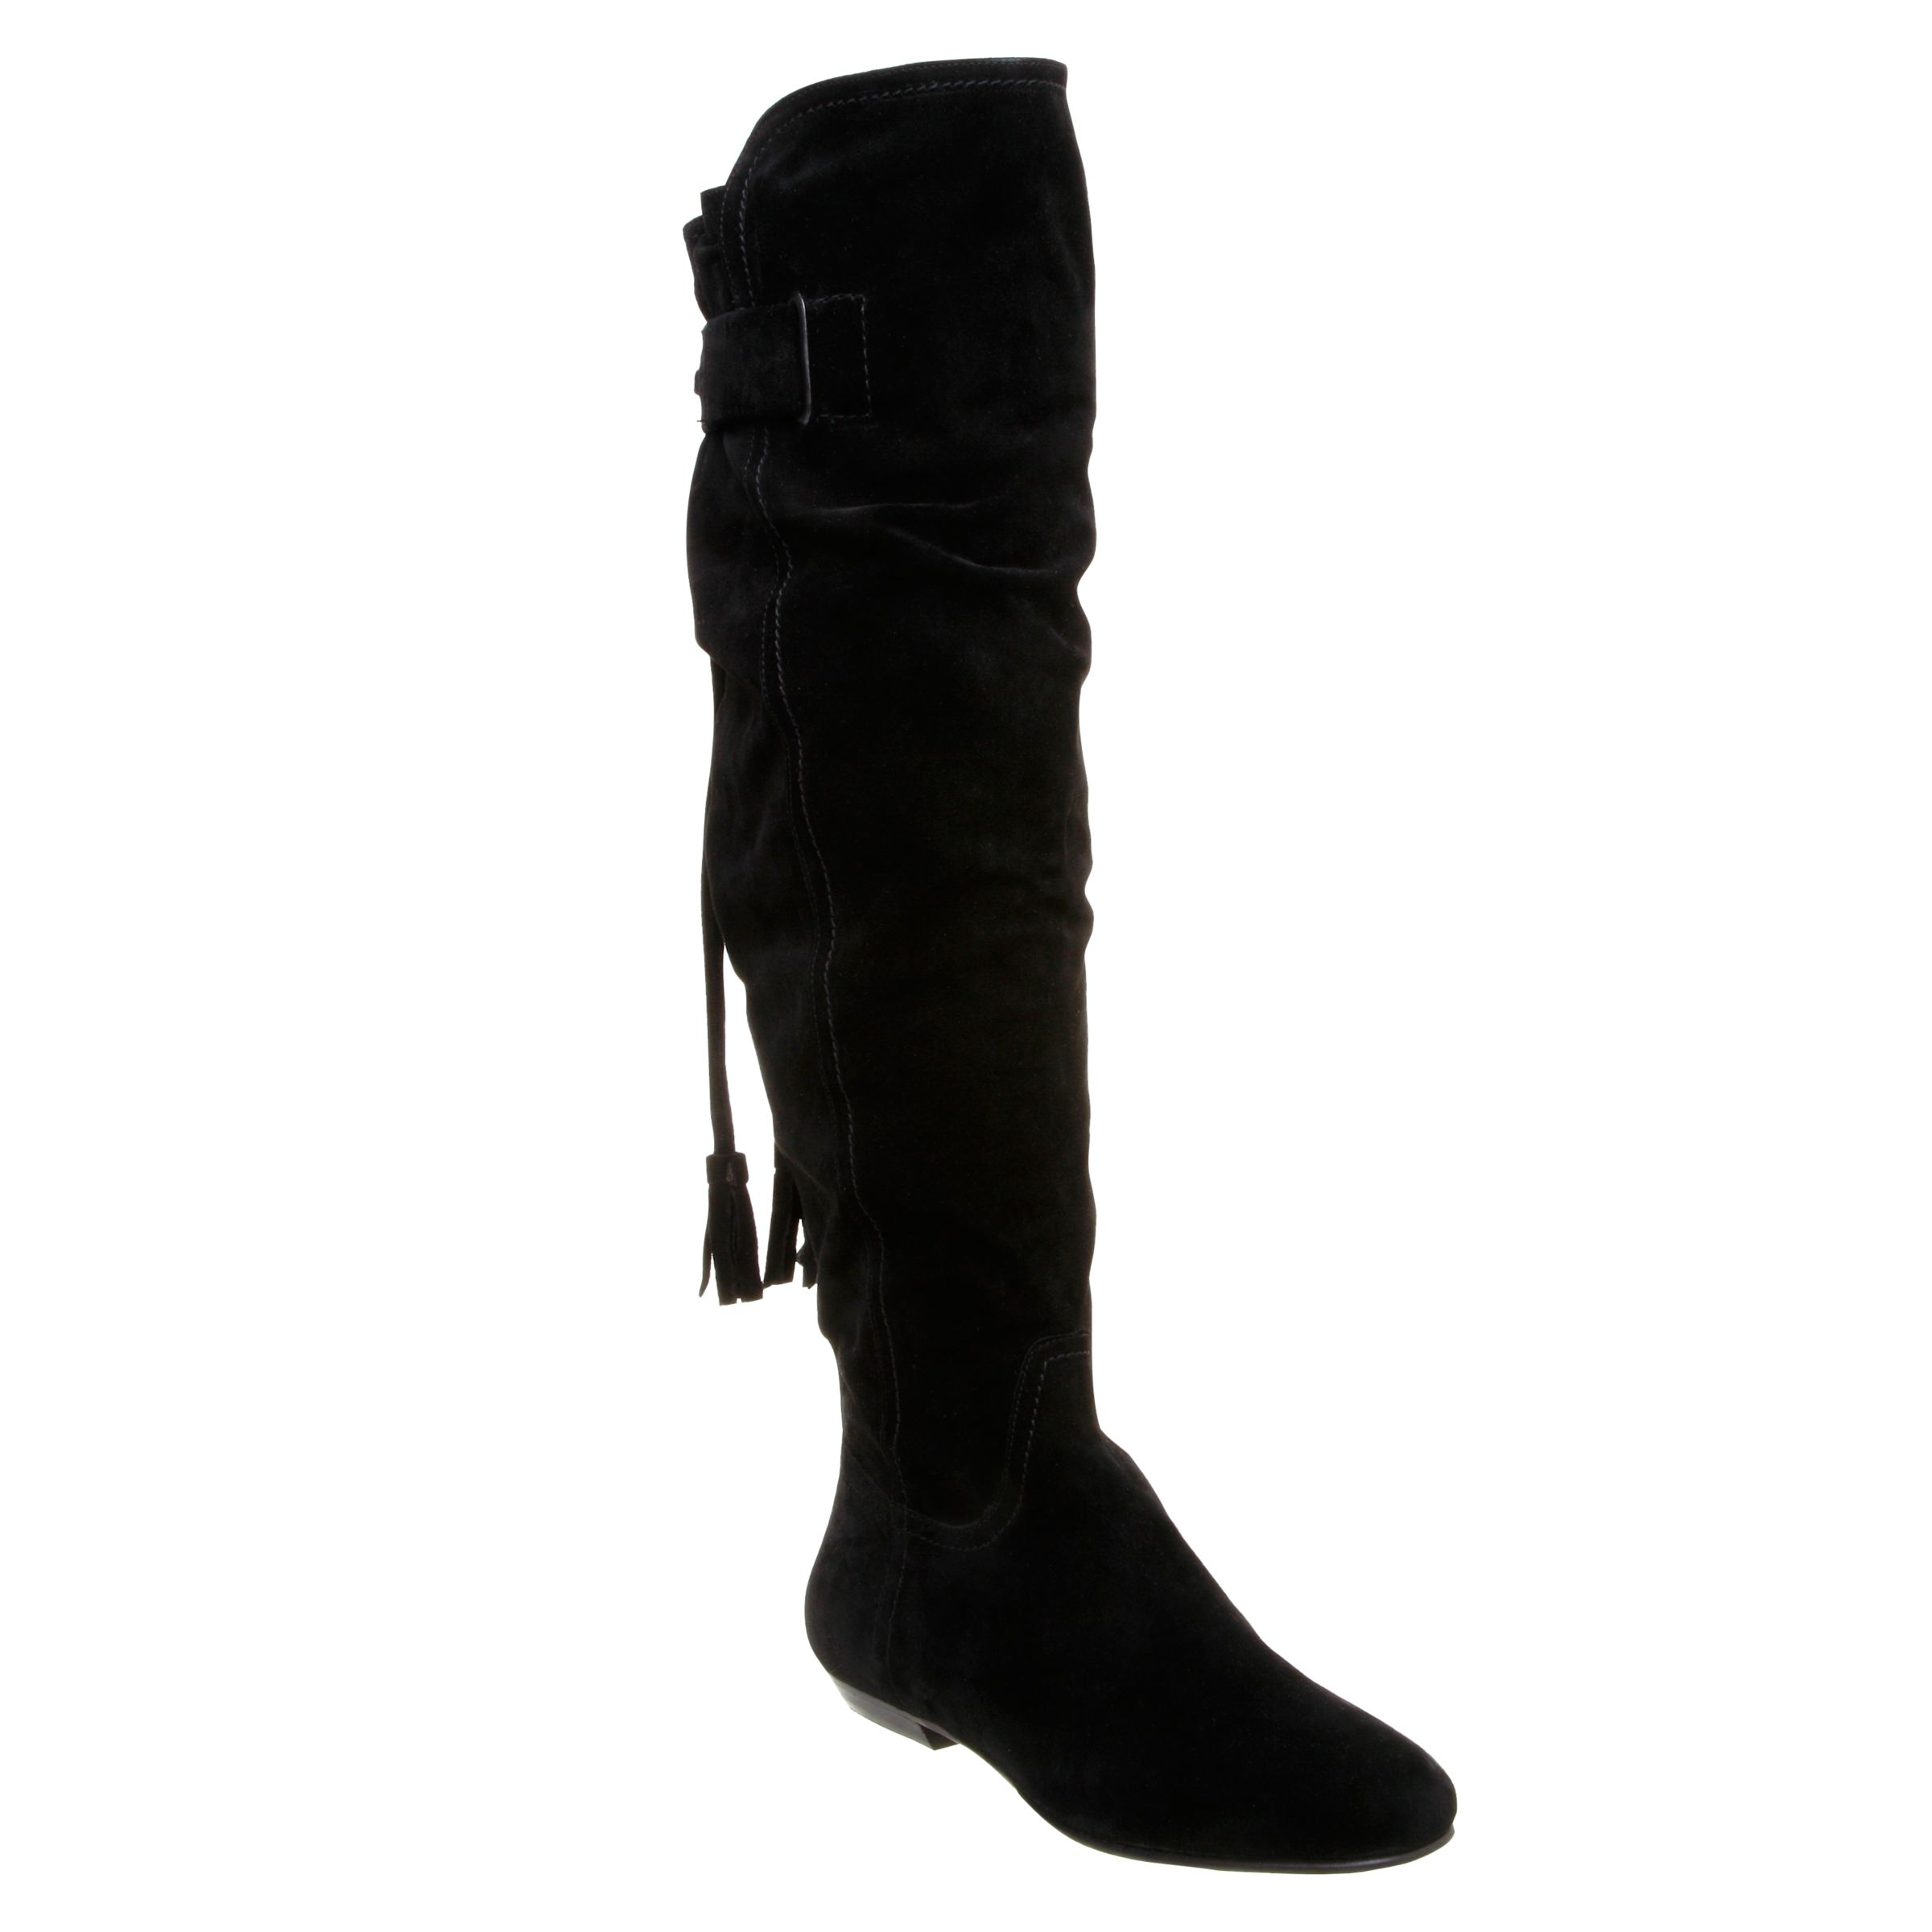 Pied A Terre Periton Ruched Lace Up Back Boots, Black at John Lewis